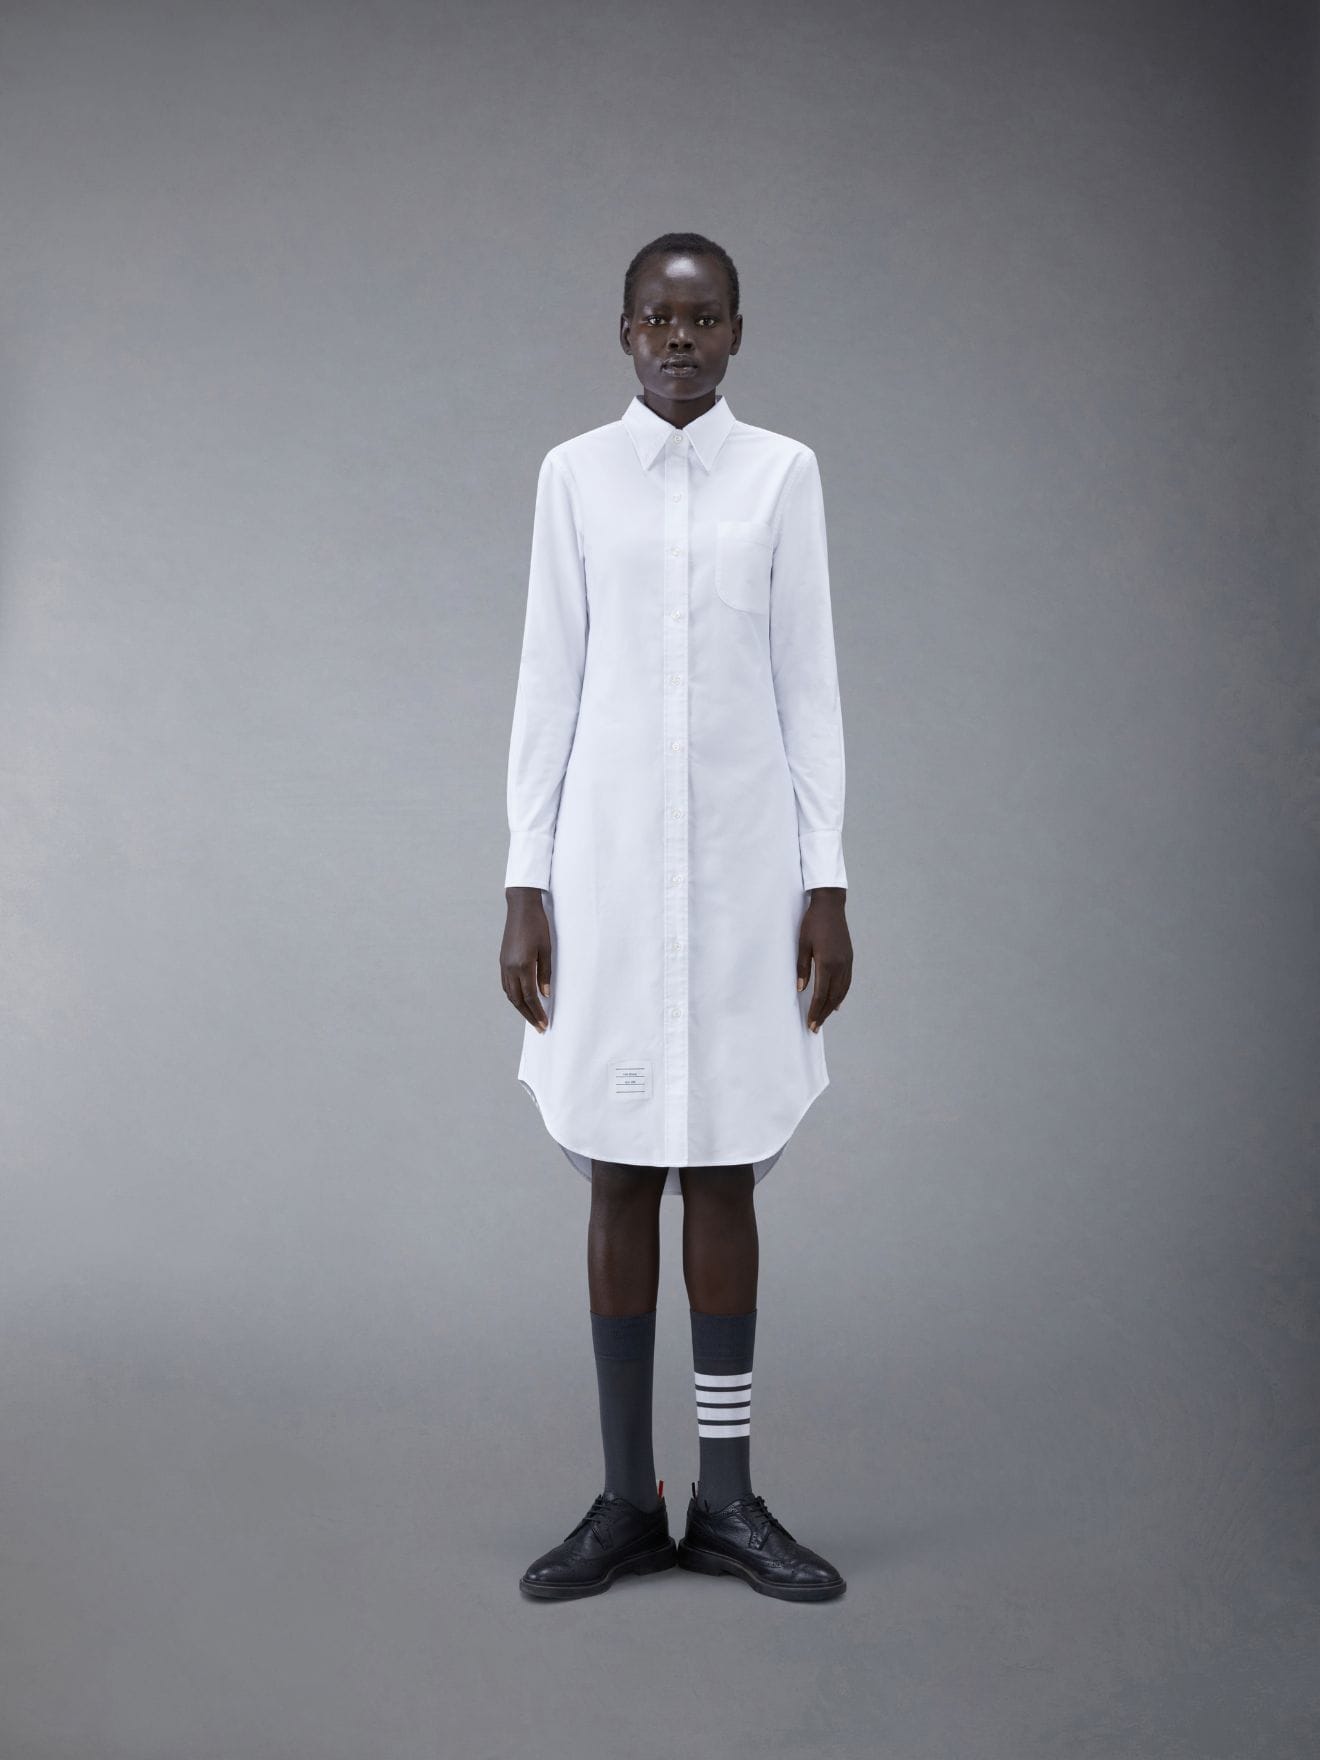 https://cdn-images.farfetch-contents.com/thom-browne-white-classic-oxford-long-sleeve-button-down-knee-length-shirtdress_12526739_45894577_1320.jpg